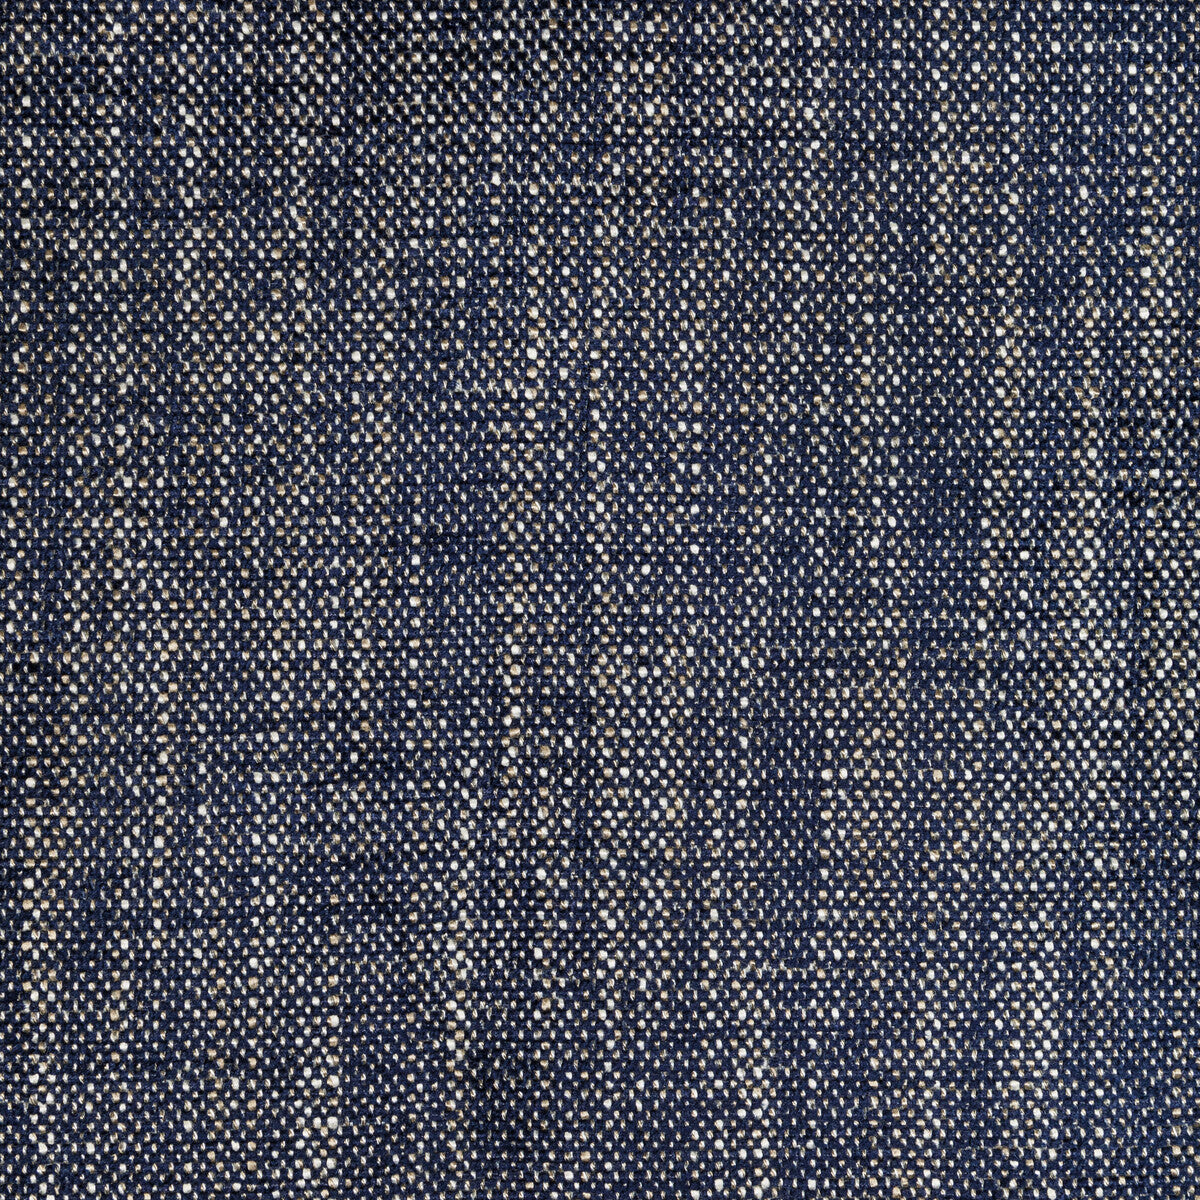 Kravet Design fabric in 36408-50 color - pattern 36408.50.0 - by Kravet Design in the Performance Crypton Home collection